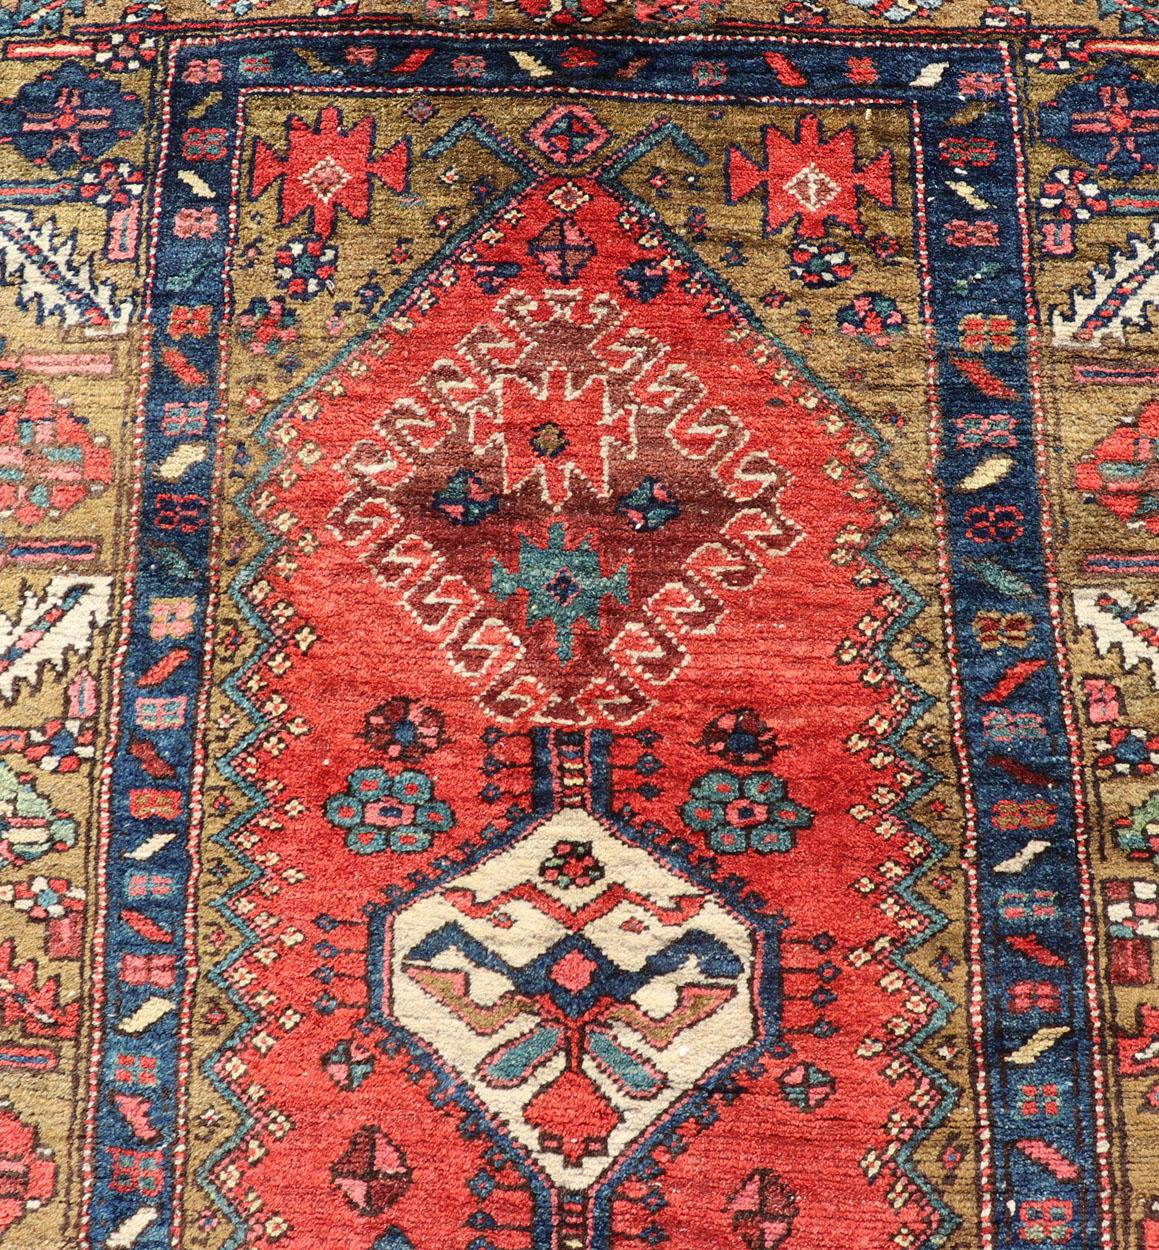 Antique Persian Heriz Runner in Reds, Blues, Pink, Ivory and Earthy Tones For Sale 3